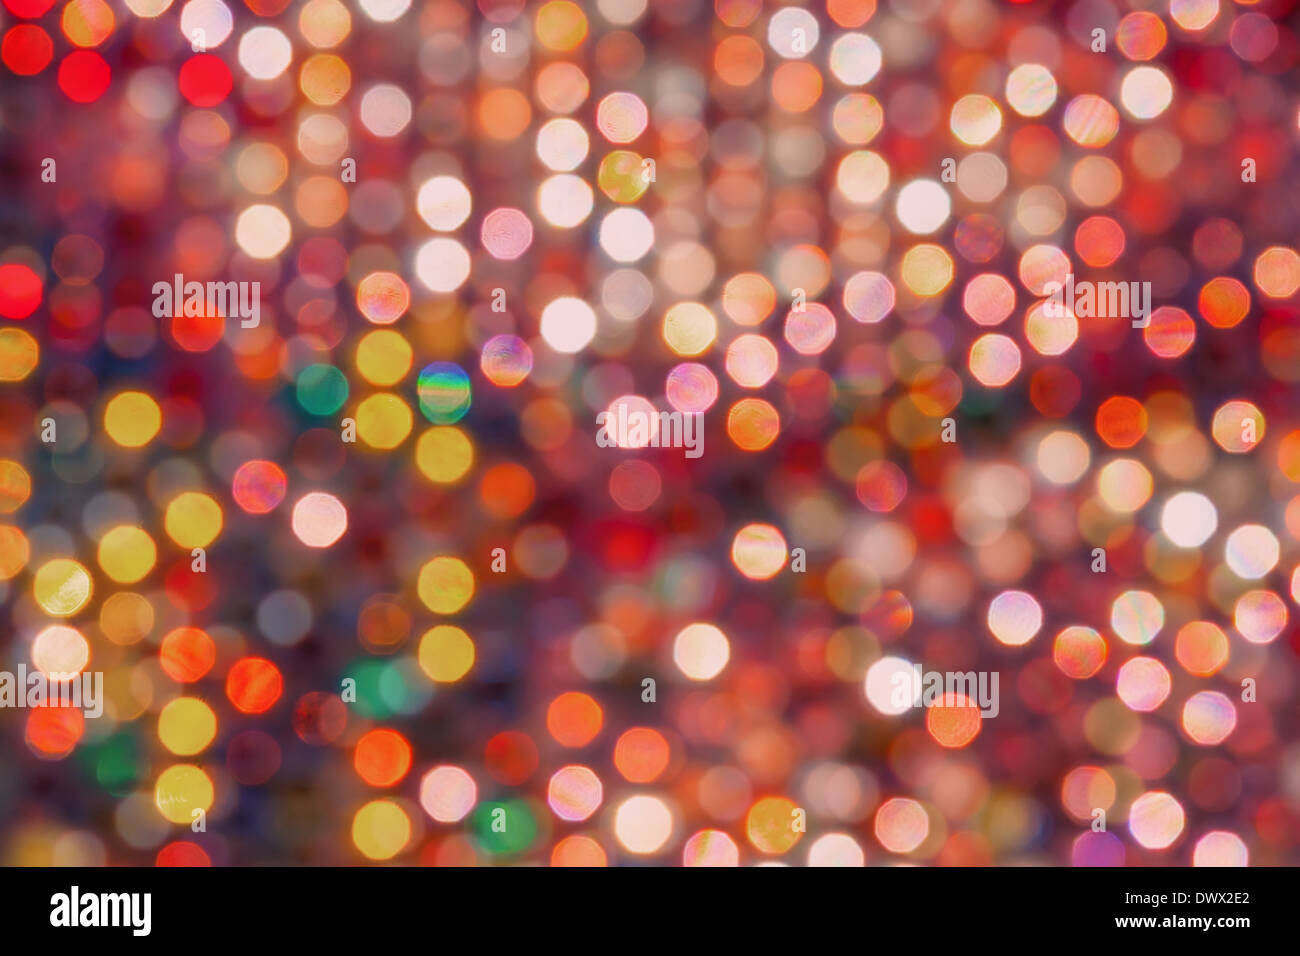 Abstract texture with out-of-focus mutli-coloured highlights. Stock Photo